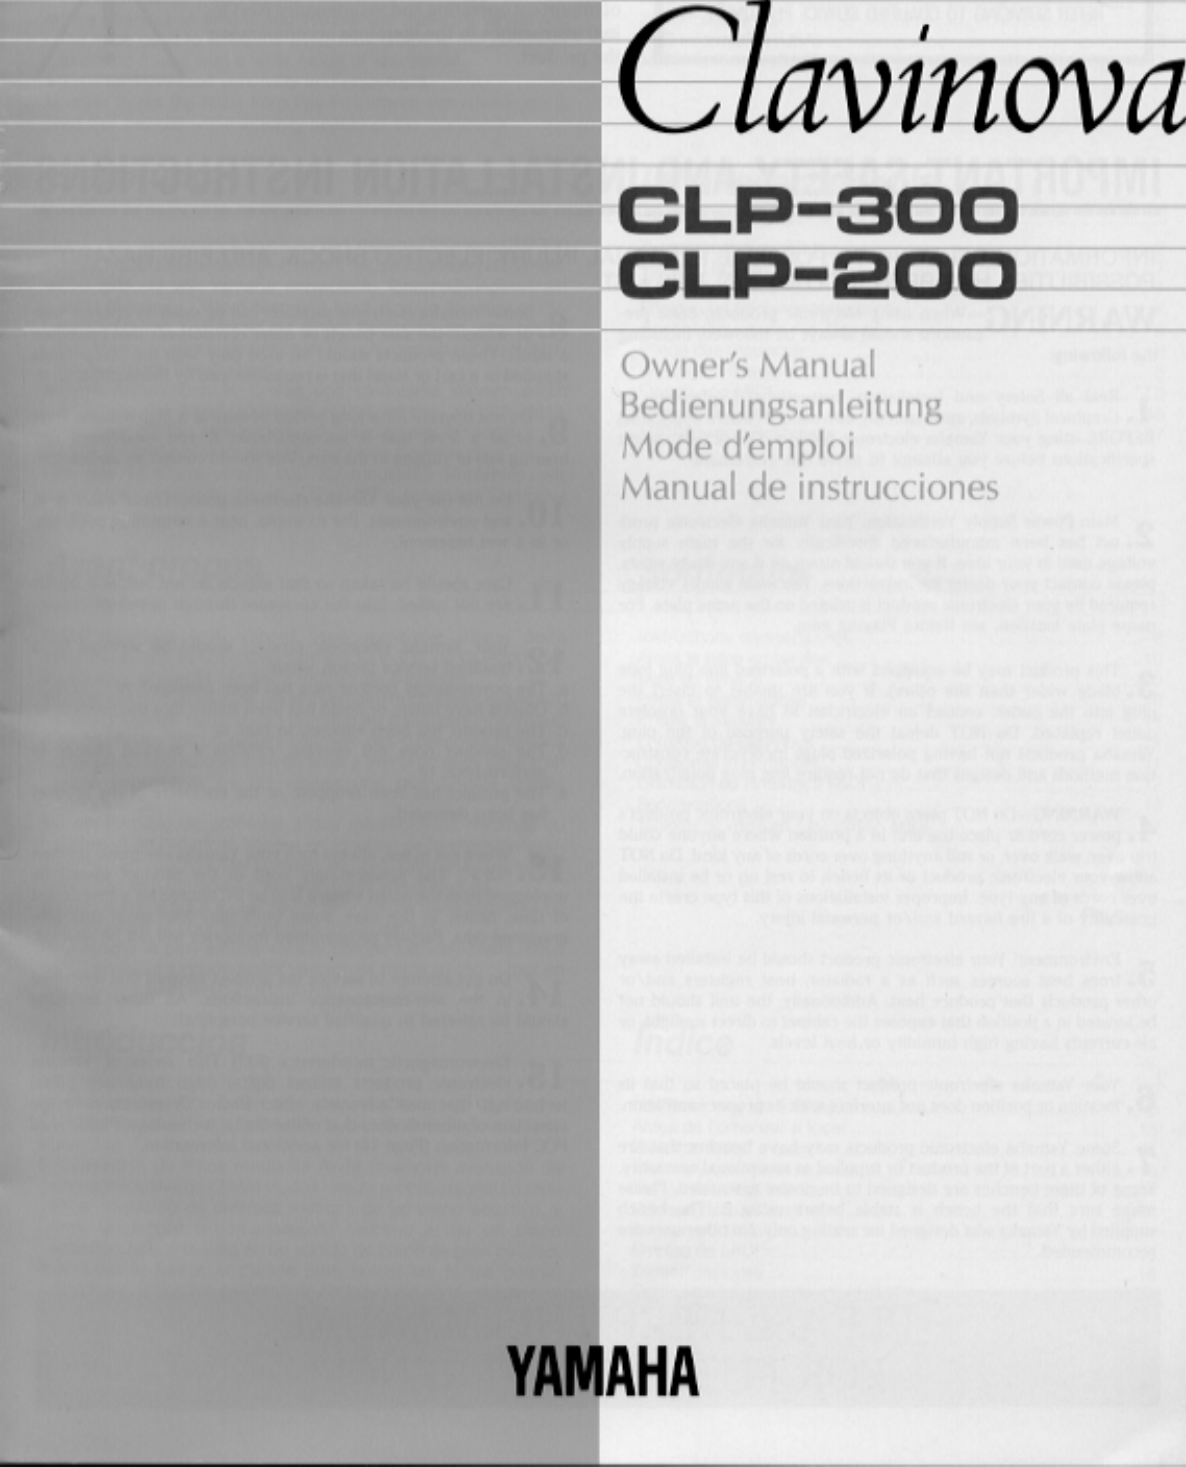 Page 1 of 11 - Yamaha  CLP-300/CLP-200 Owner's Manual (Image) CLP300S